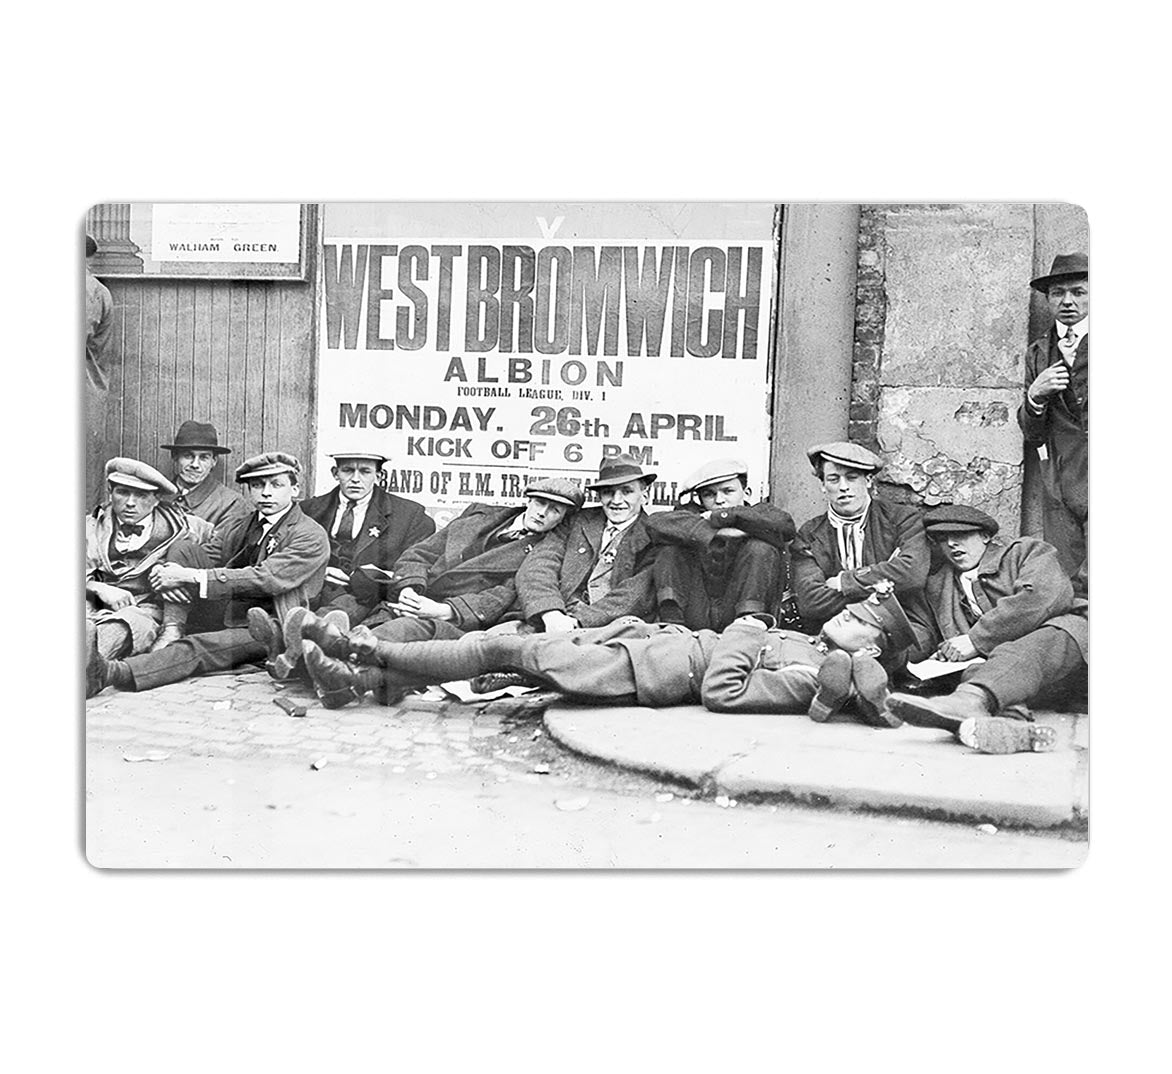 Football fans queue on the morning of a F.A. Cup match 1920 HD Metal Print - Canvas Art Rocks - 1